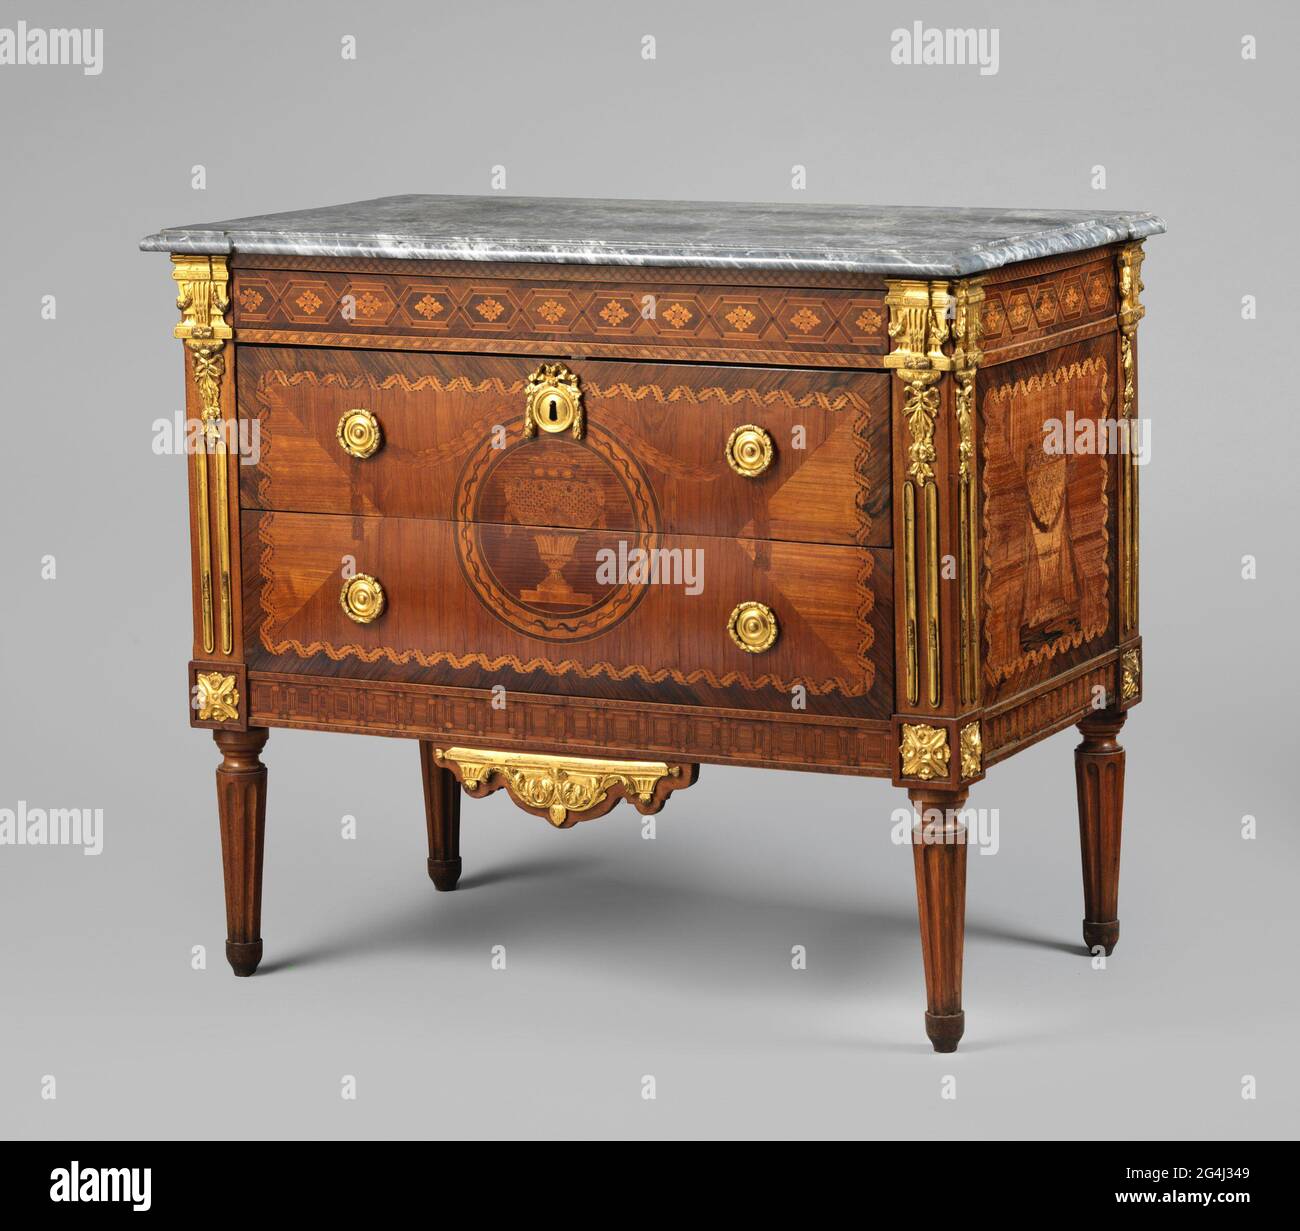 Tea chest with marquetry, Tea chest of oak, glued with marquetry in walnut,  rose, maple, green-stained maple and rosewood, with a decor of stacked  cubes. Copper ball feet and a handle of